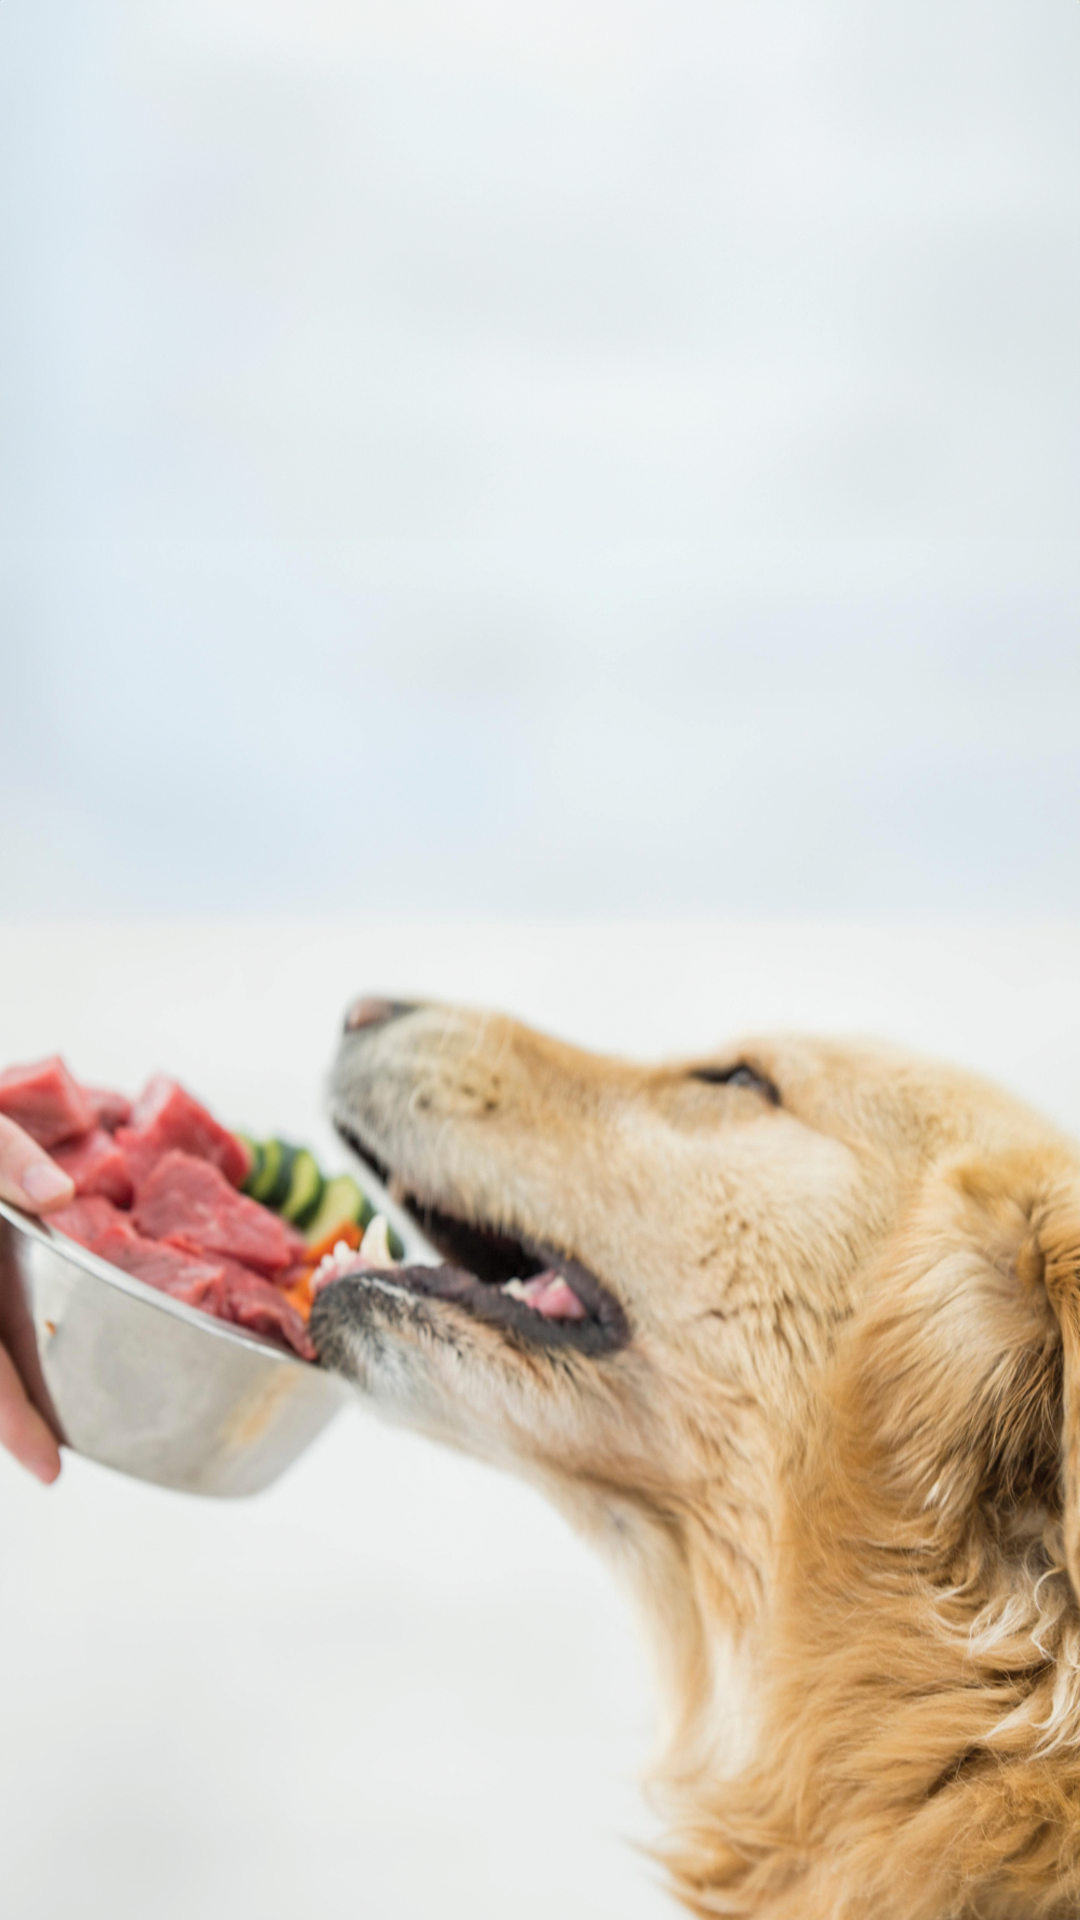 What is a Raw Diet for Dogs?